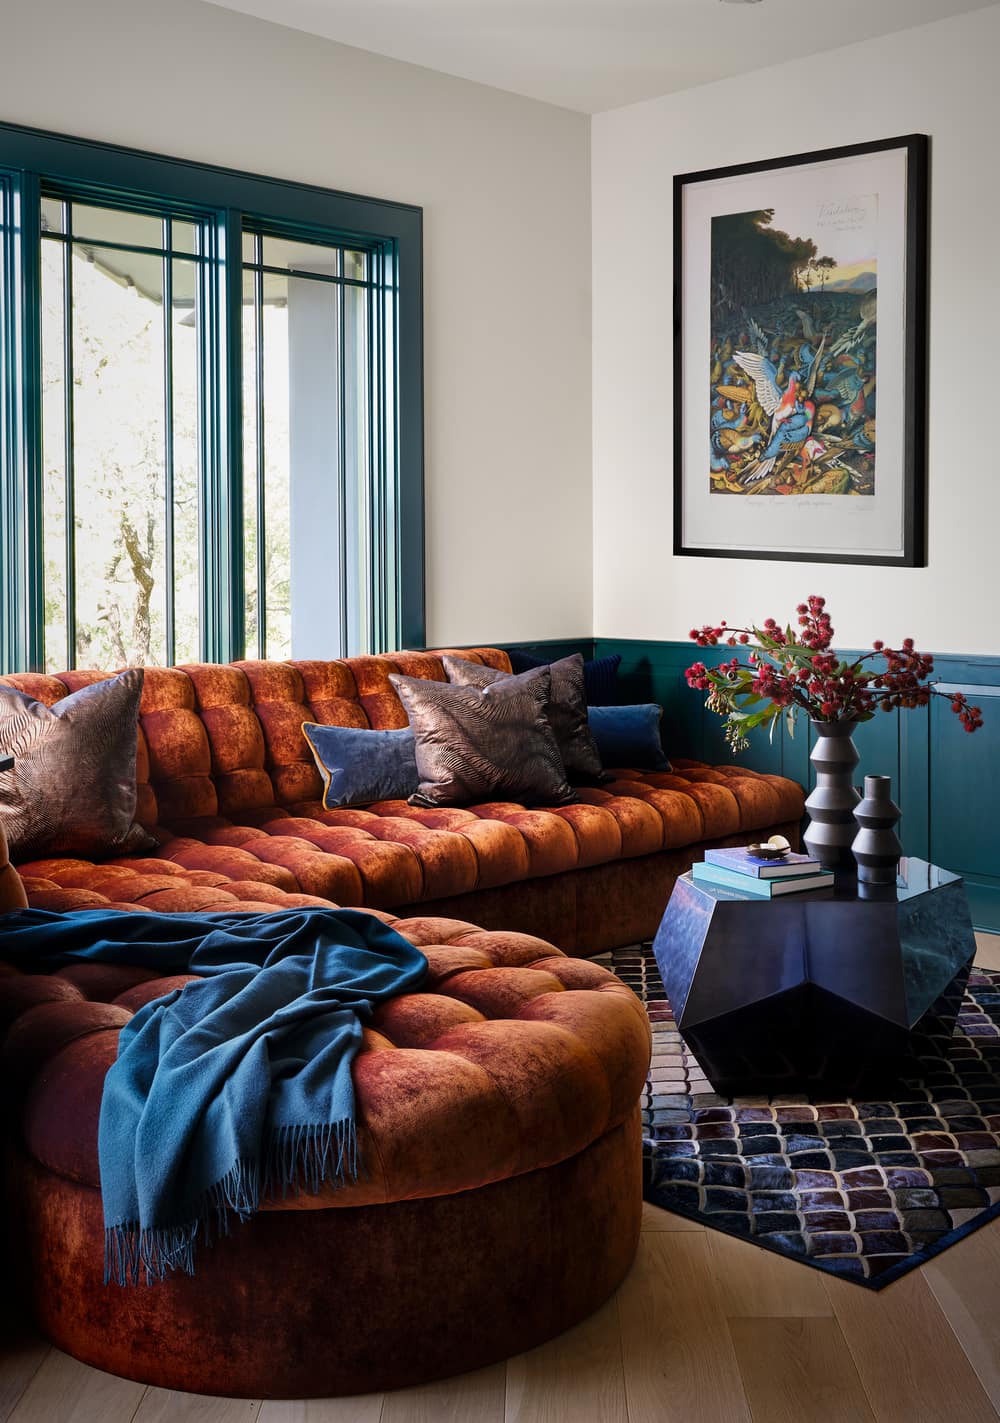 Bold Pattern and Color Make This Home a Maximalist Dream